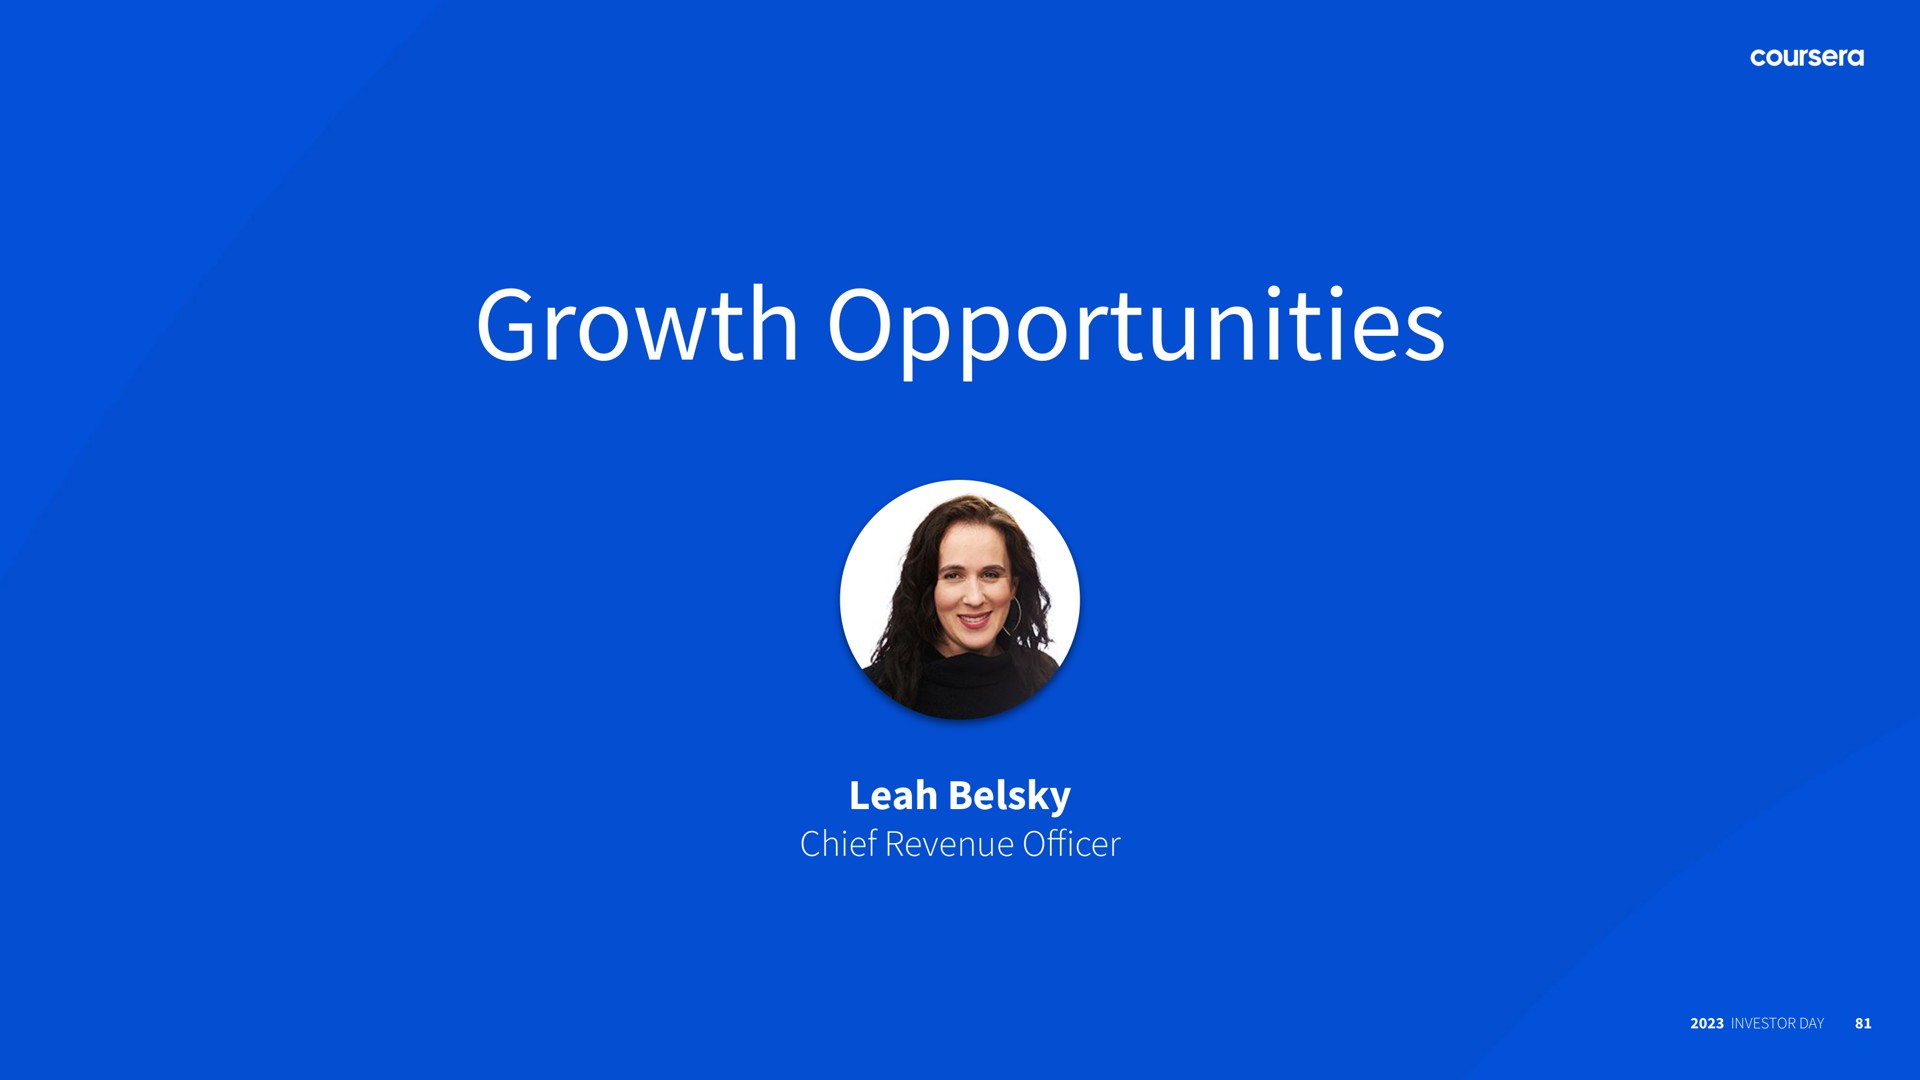 growth opportunities | Coursera